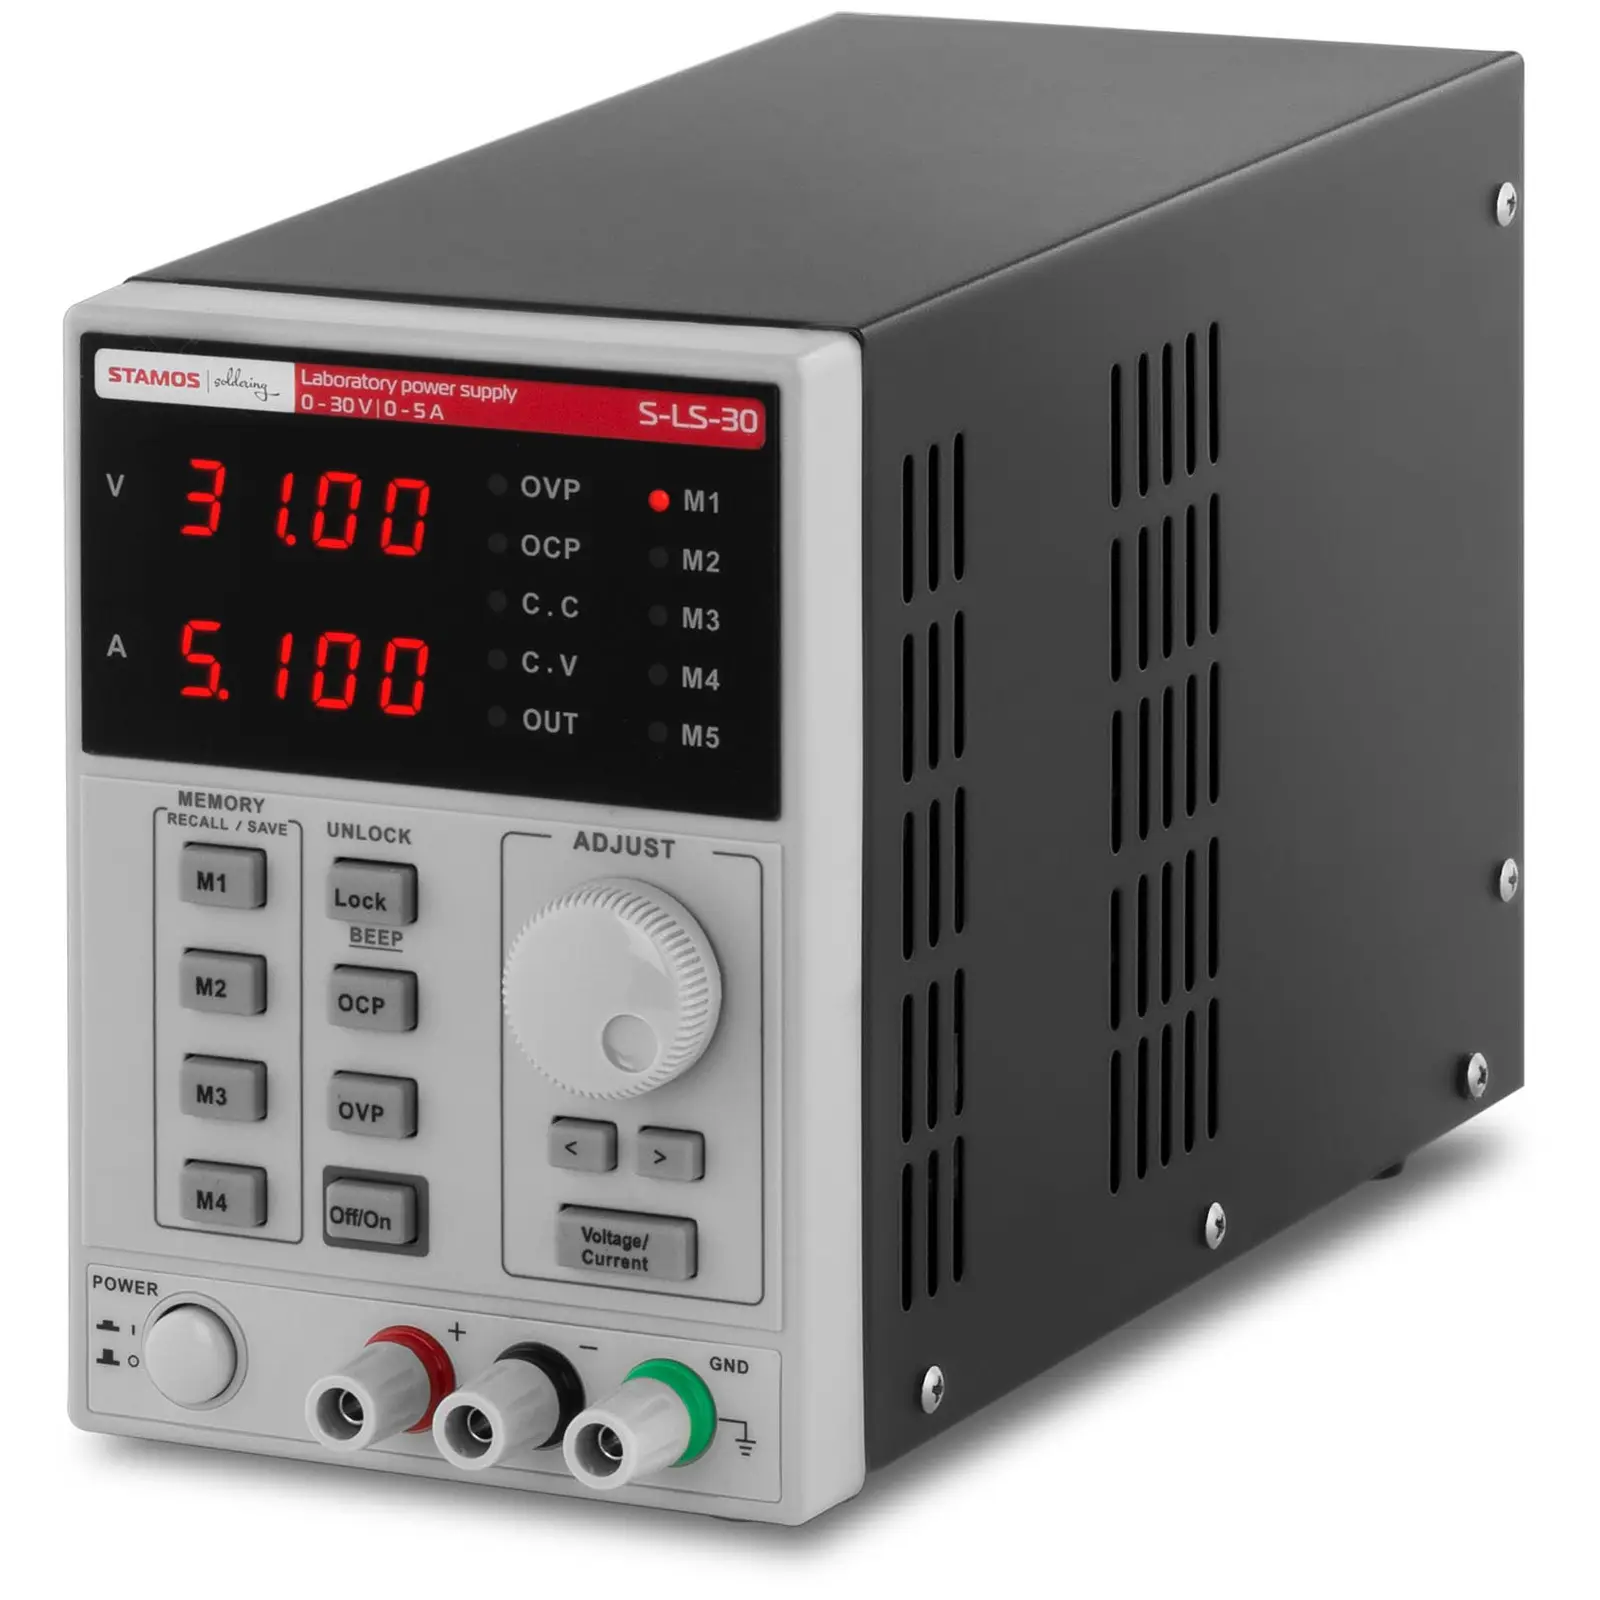 Bench power supply - 0-30 V, 0-5 A DC, 250 W - 4 memory spaces